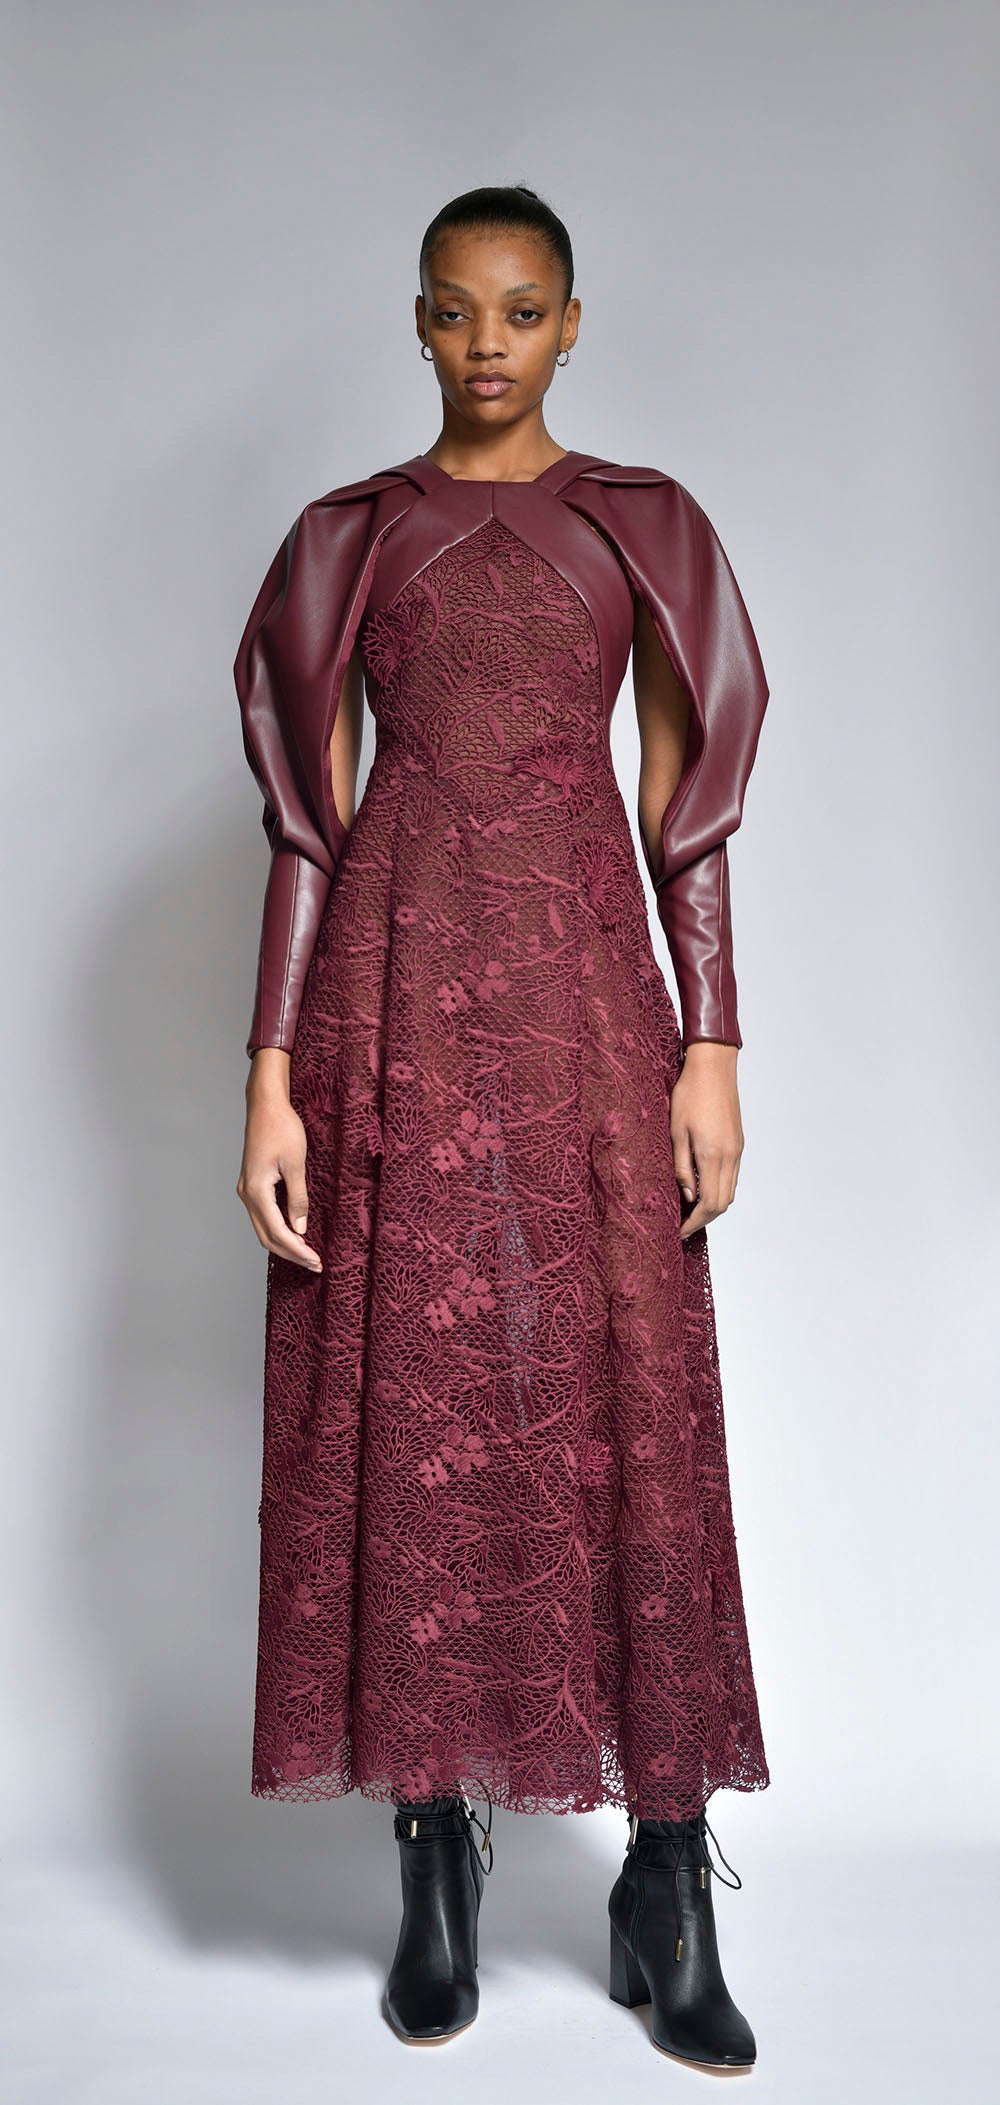 Claret Vegan Leather and Lace Dress with Draped Sleeves